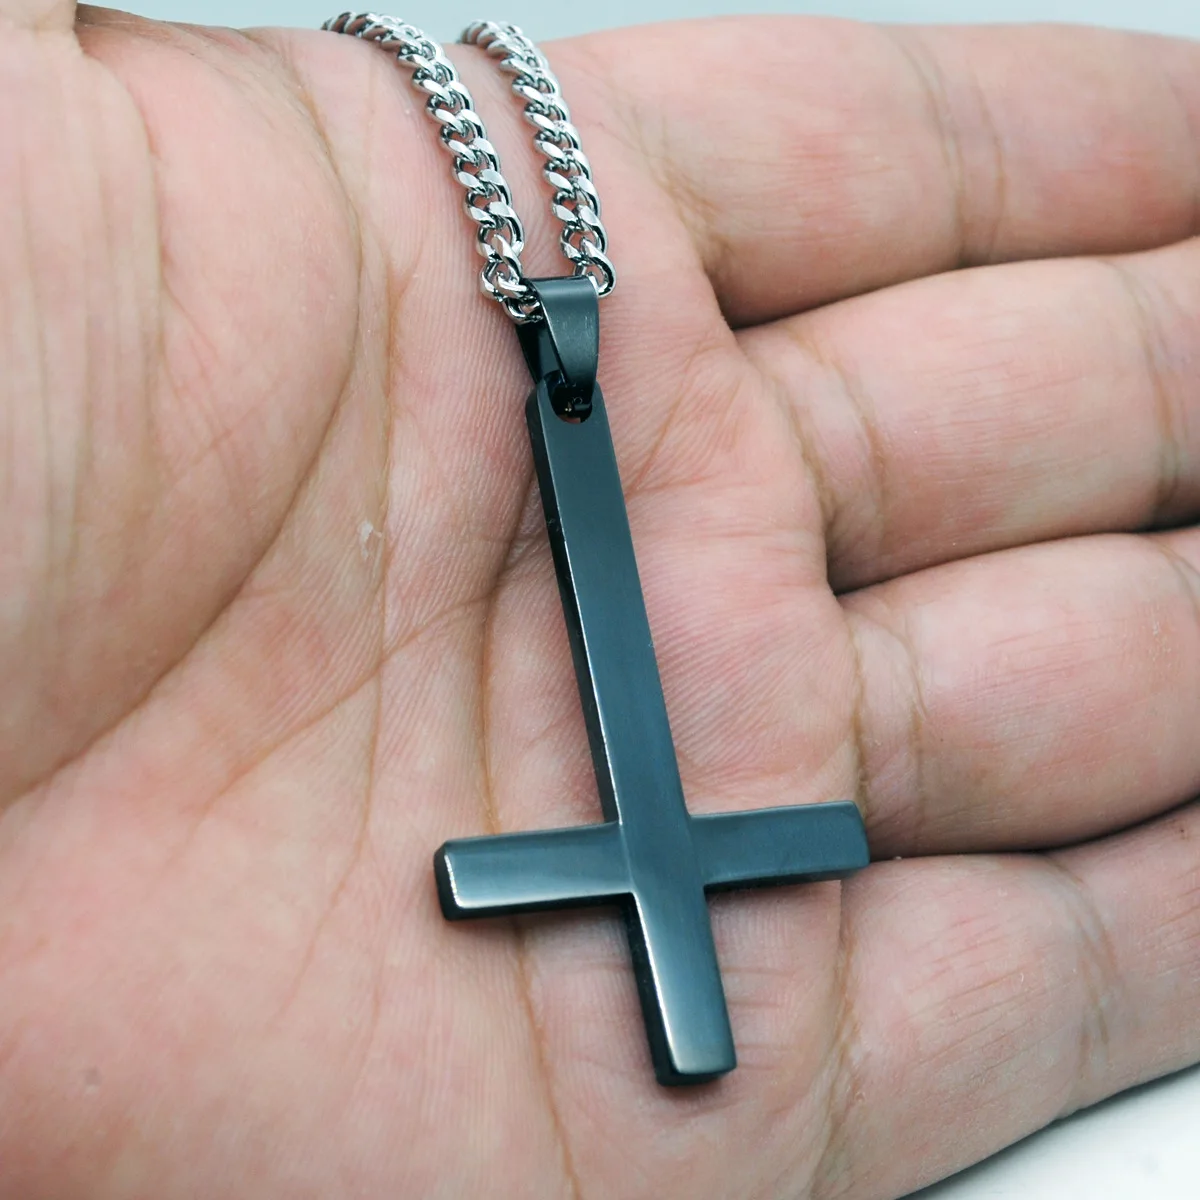 PROSTEEL Upside Down Cross Necklace, 316L Stainless Steel/925 Sterling  Silver Inverted Cross Pendant, Satanic Jewelry for Women Men | Cross  necklace, Upside down cross necklace, Satanic jewelry